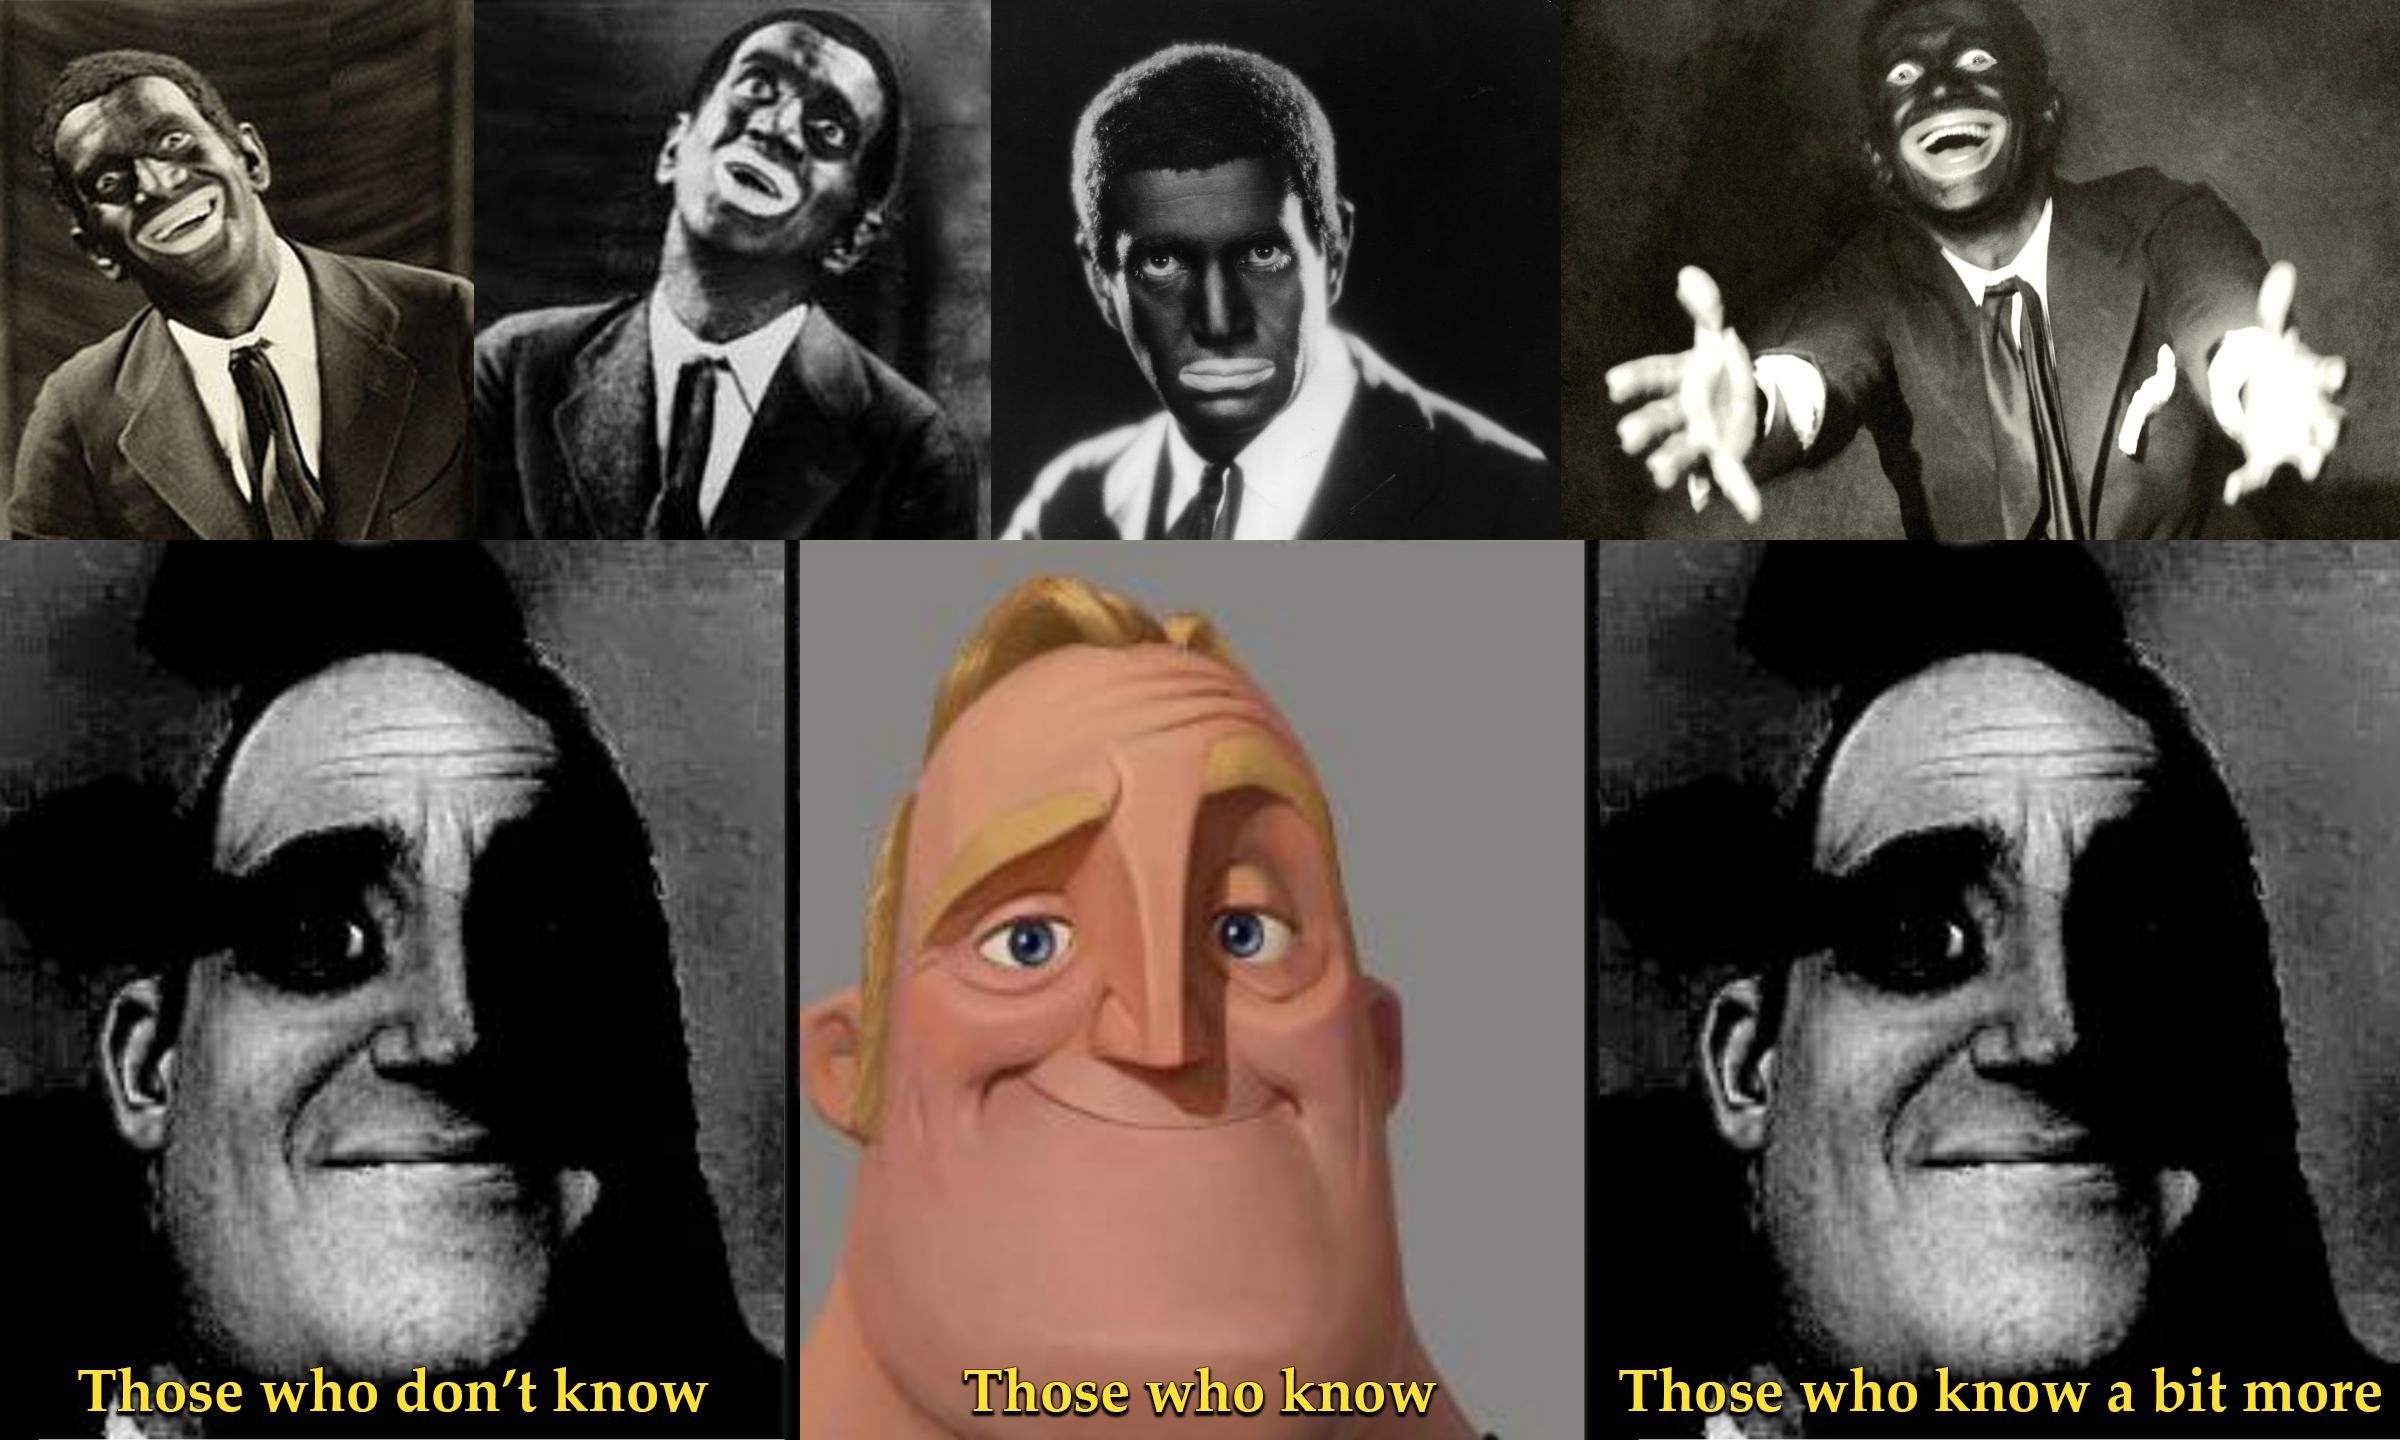 Al Jolson's choice of makeup wasn't entirely black and white...